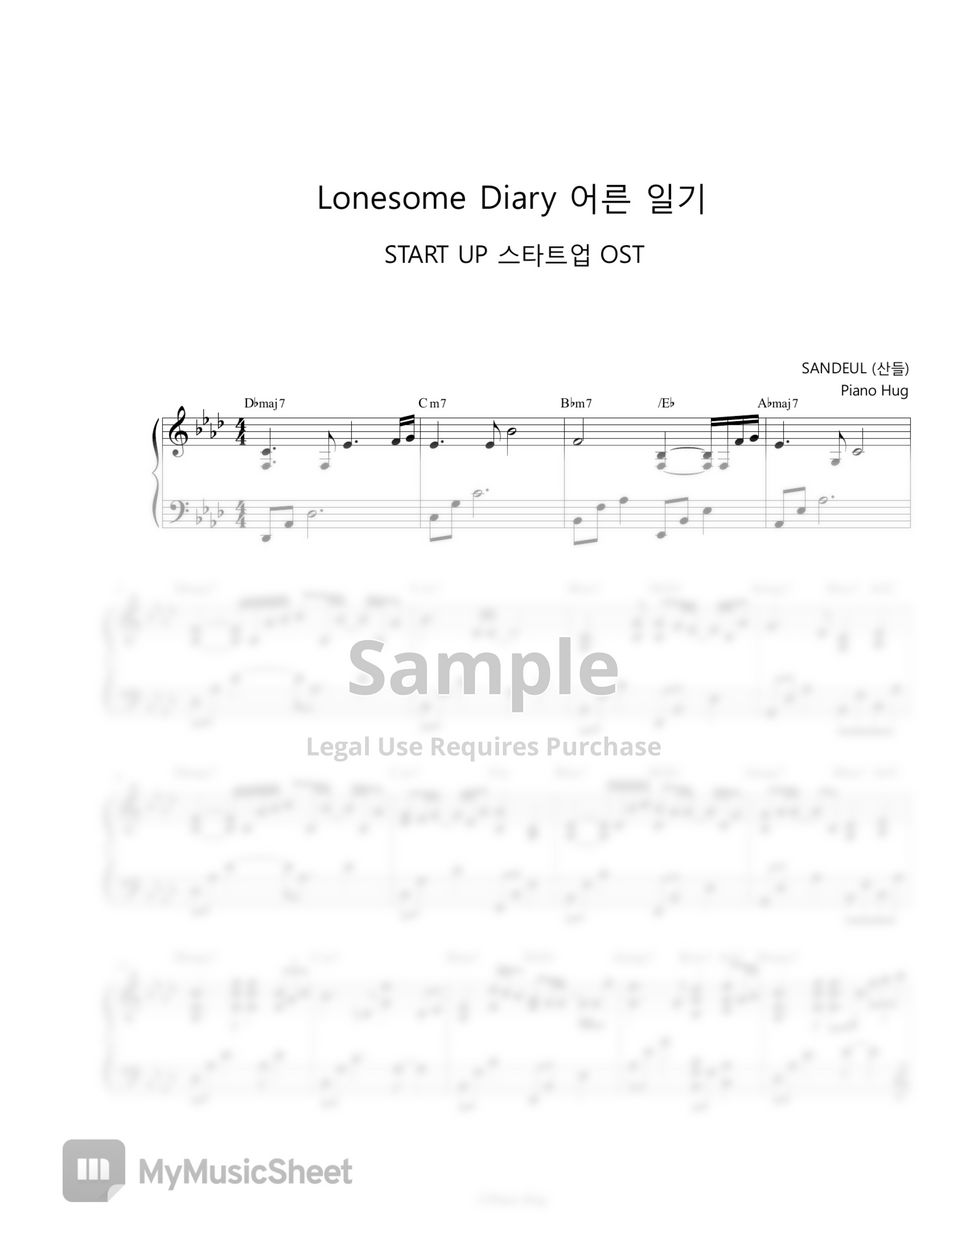 SANDEUL 산들 (B1A4) - Lonesome Diary 어른 일기 (START UP OST) by Piano Hug